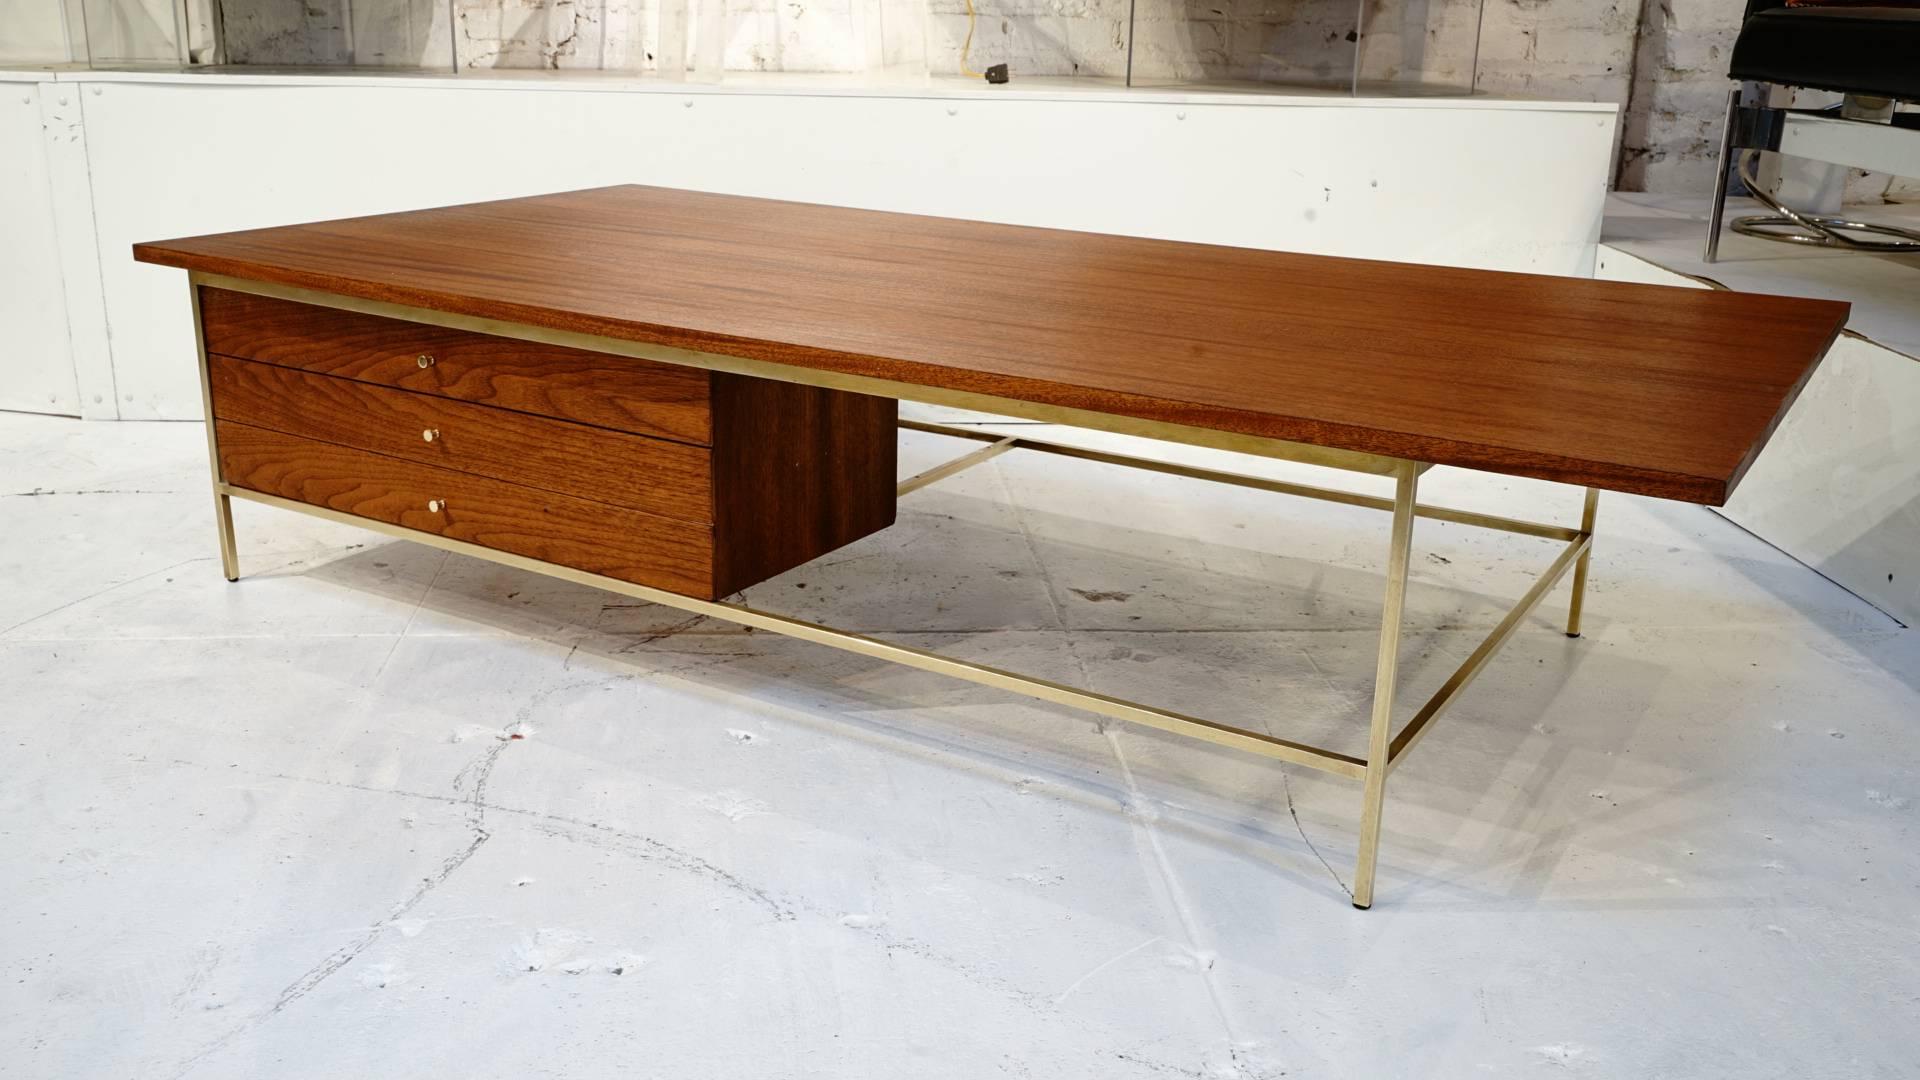 Gorgeous 1950s Paul McCobb for Calvin cocktail table.
Mahogany and brass with architectural lines.

Very large. Measures: 33